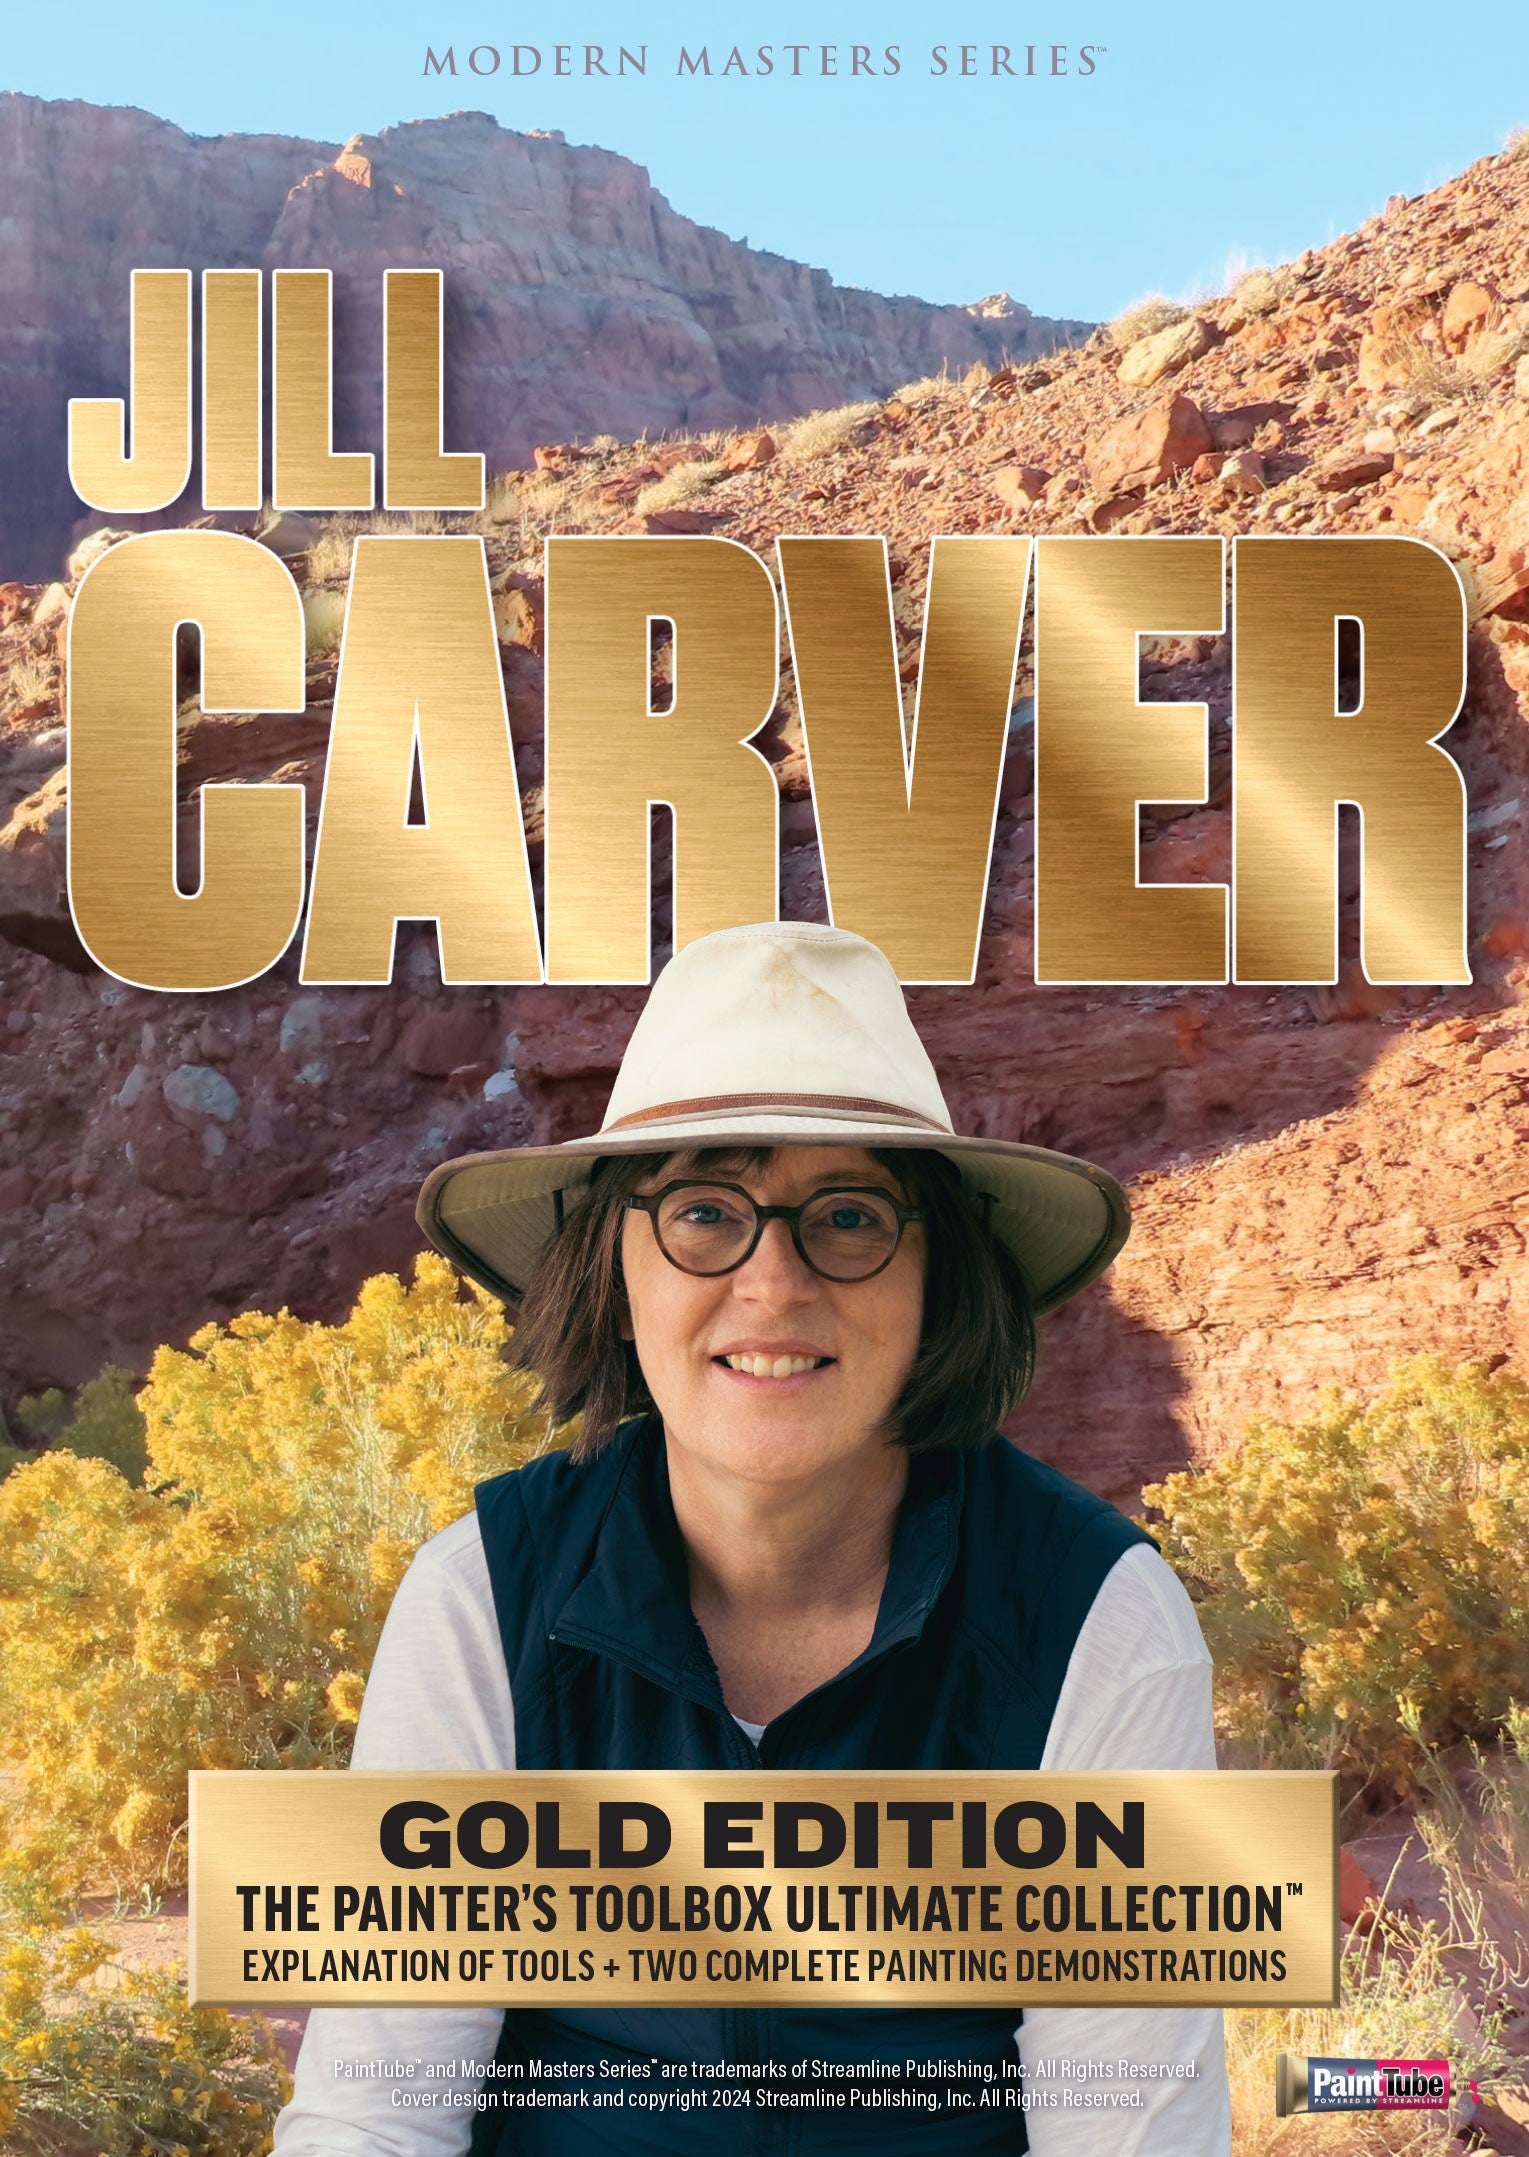 JILL CARVER: THE COMPLETE PAINTER'S TOOLBOX — GOLD EDITION — TOOLS EXPLAINED & TOOLS APPLIED